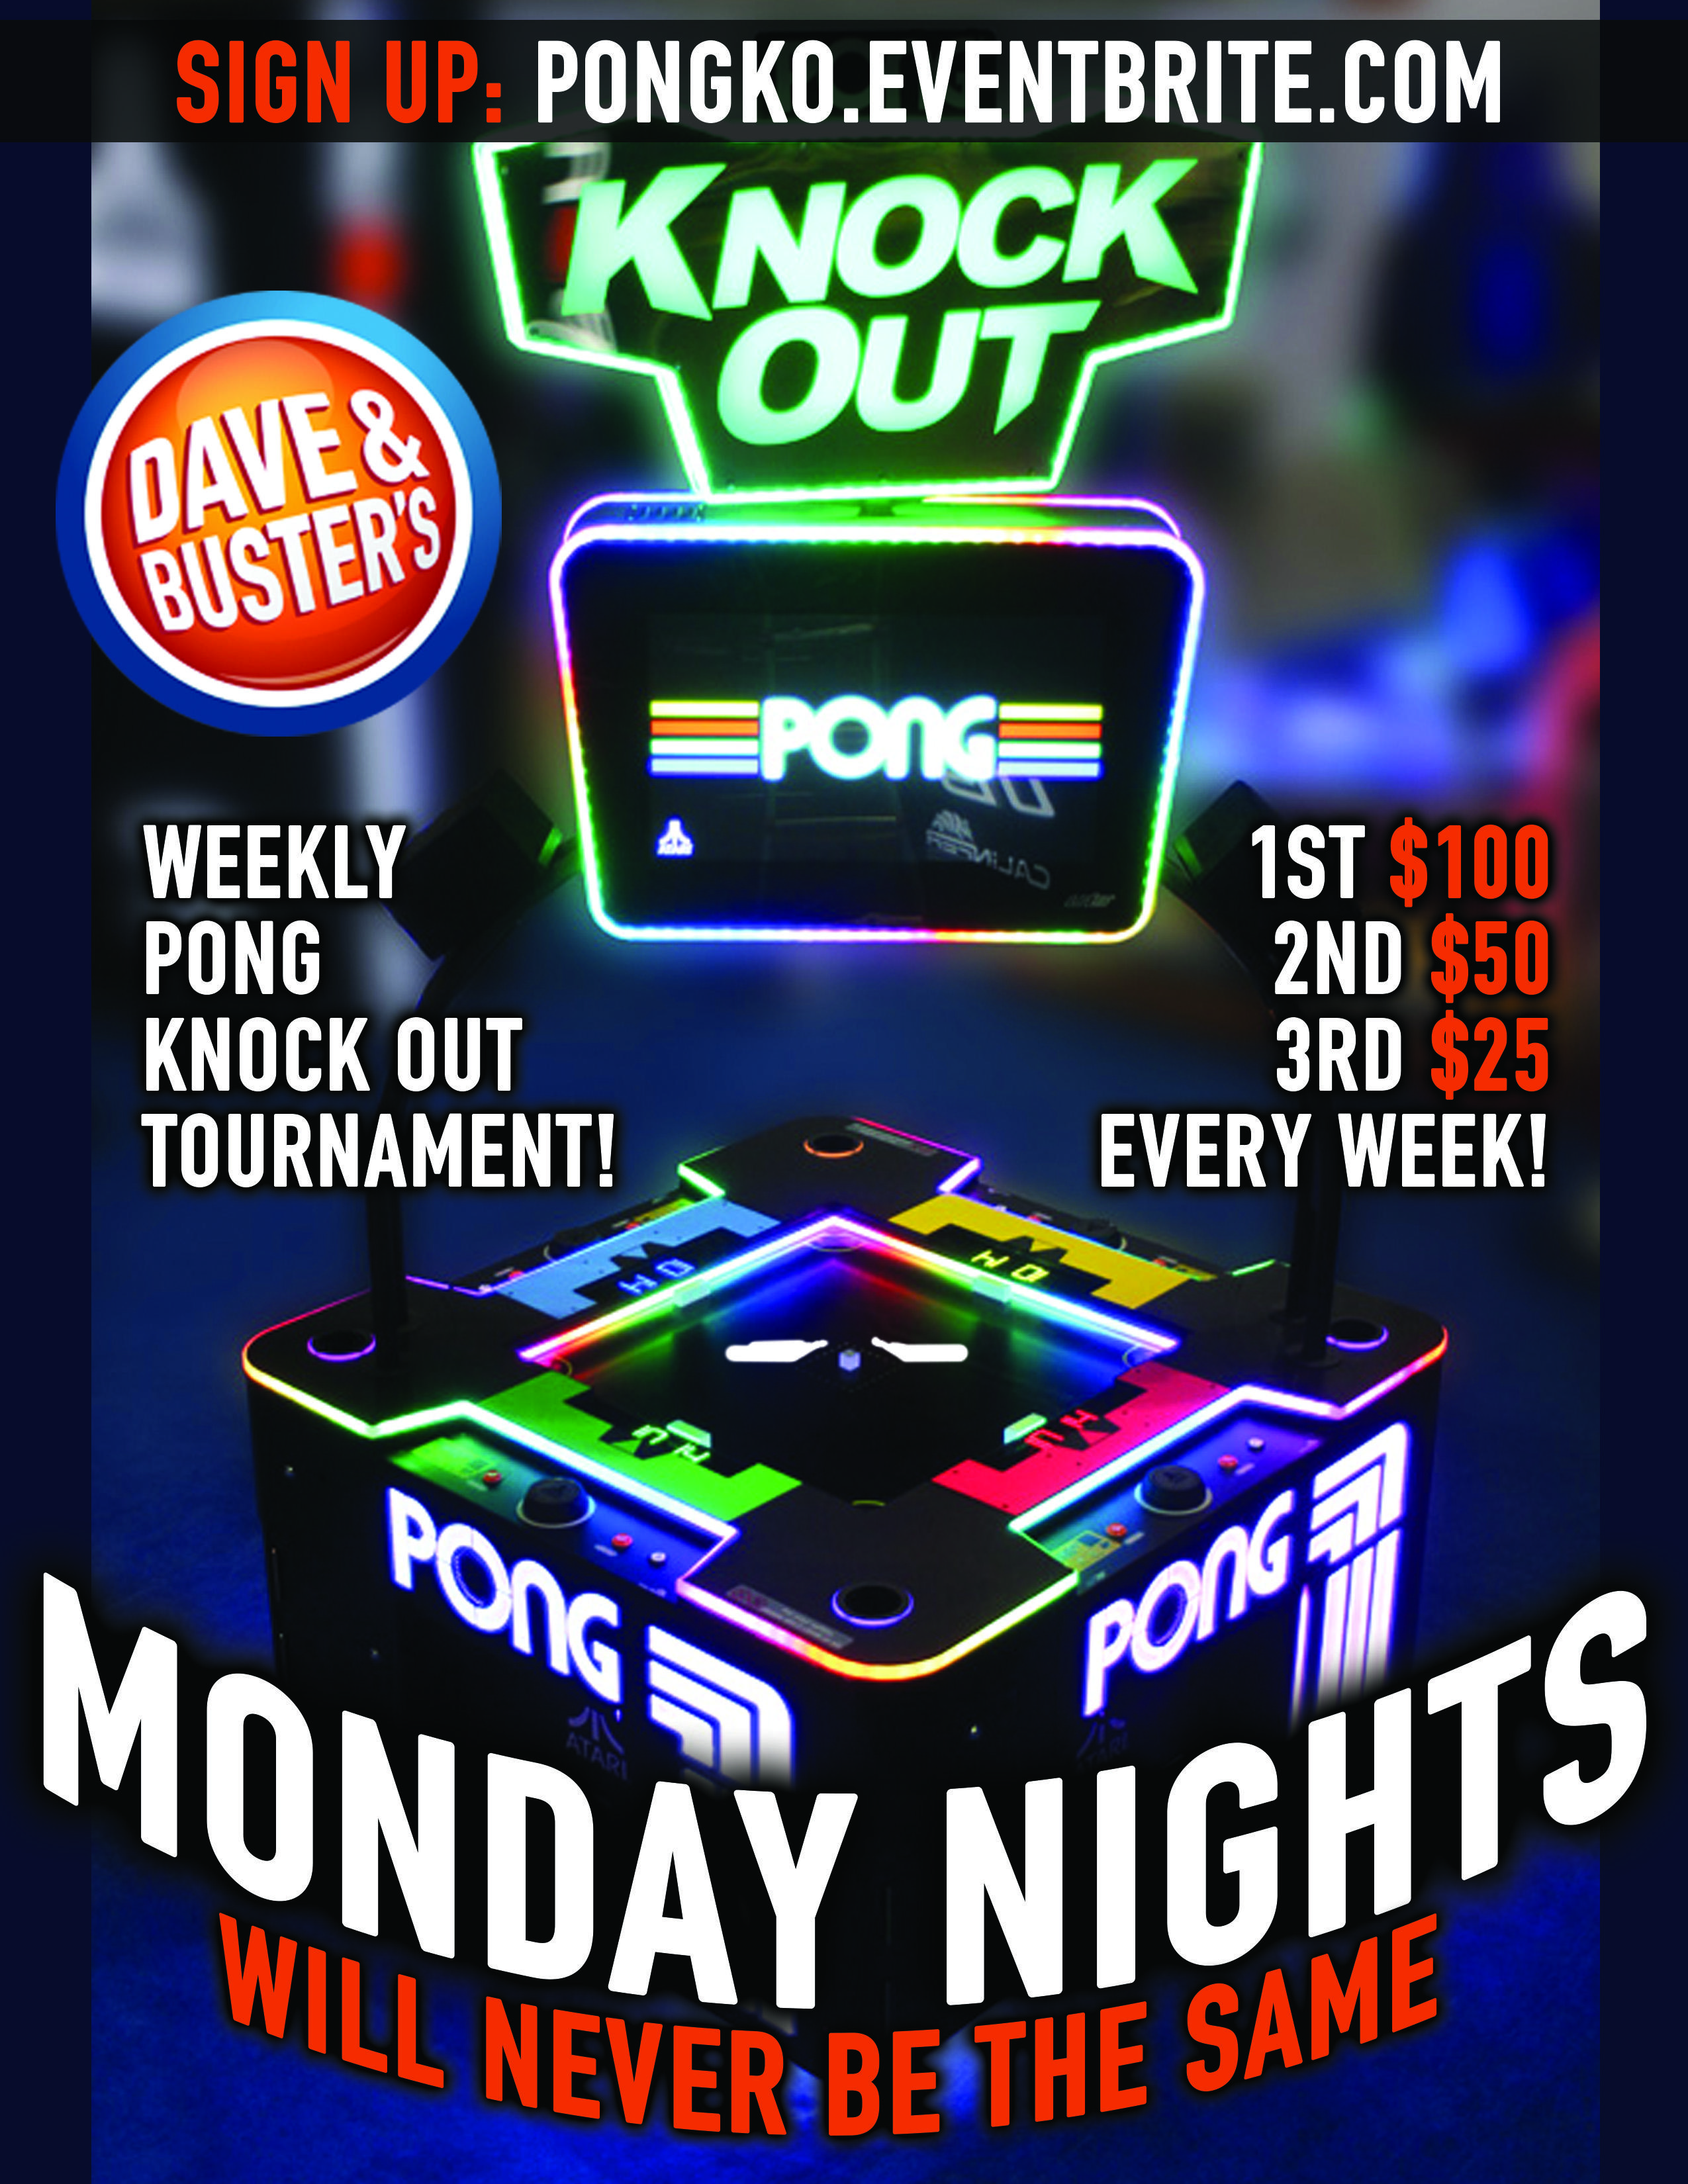 Dave & Buster's Monday Night PONG Knock Out Tournament